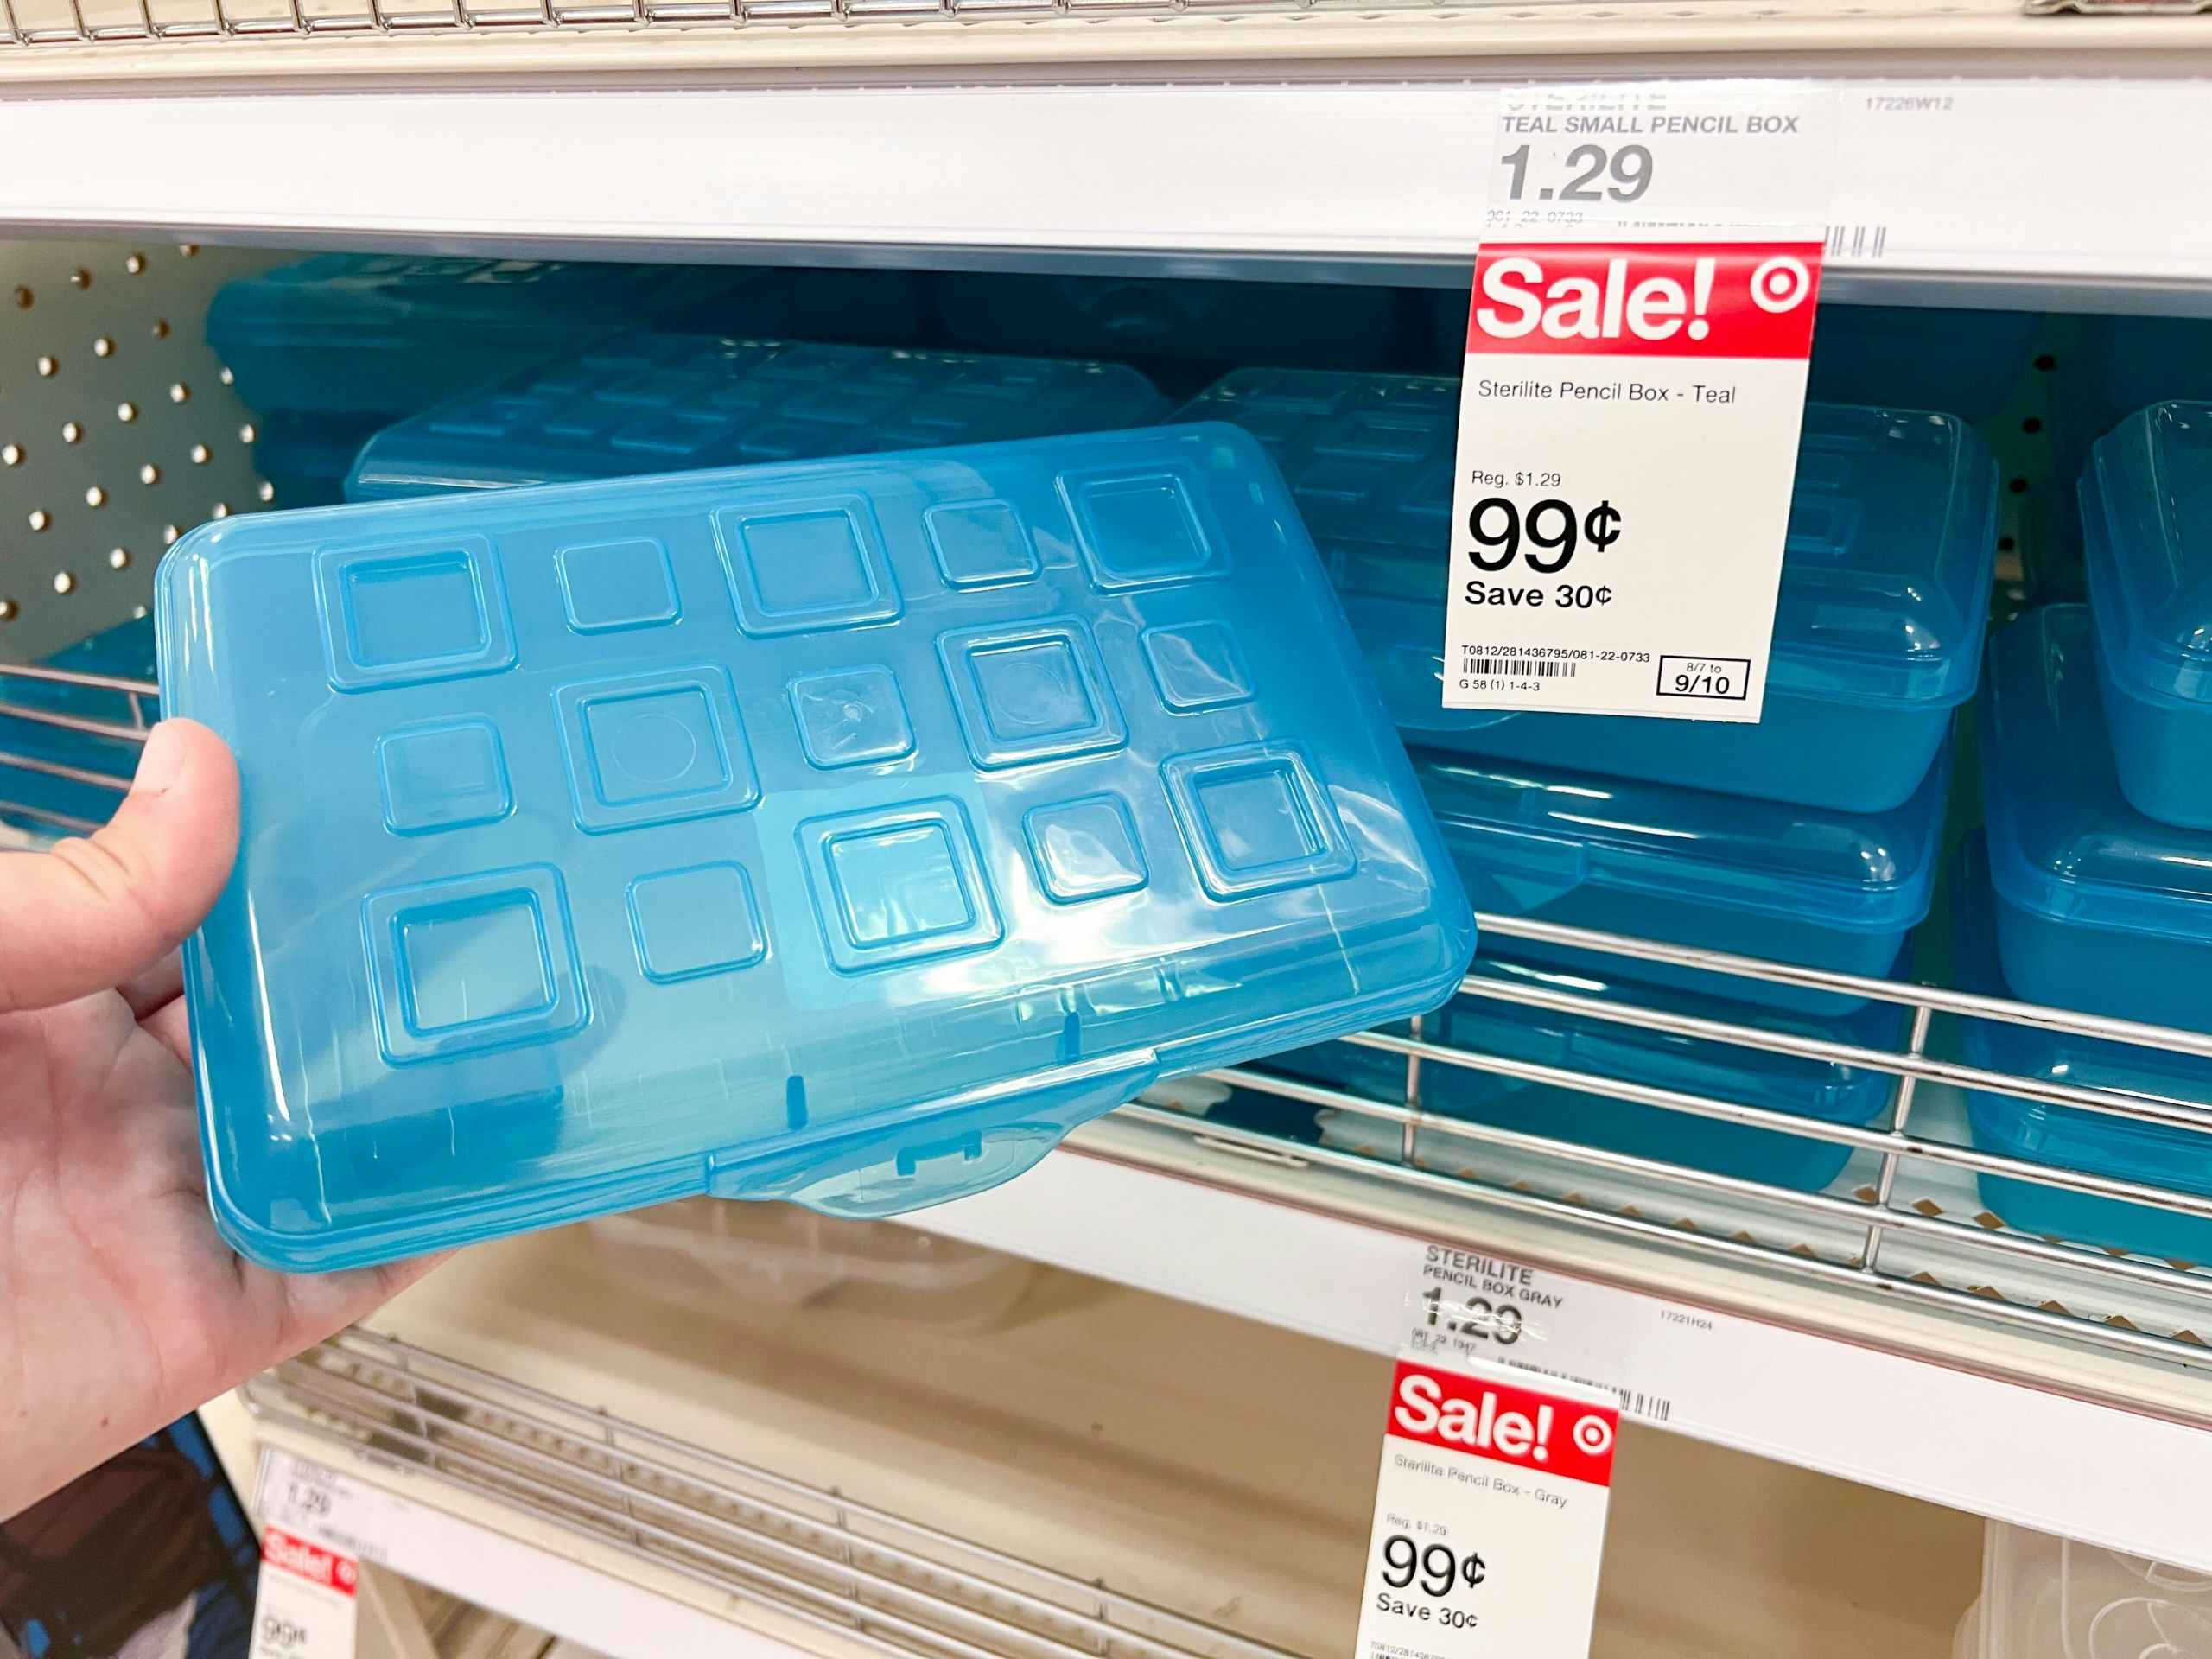 hand holding a blue Sterilite pencil box in front of a Target shelf with other pencil boxes and 99 cent sale price tag